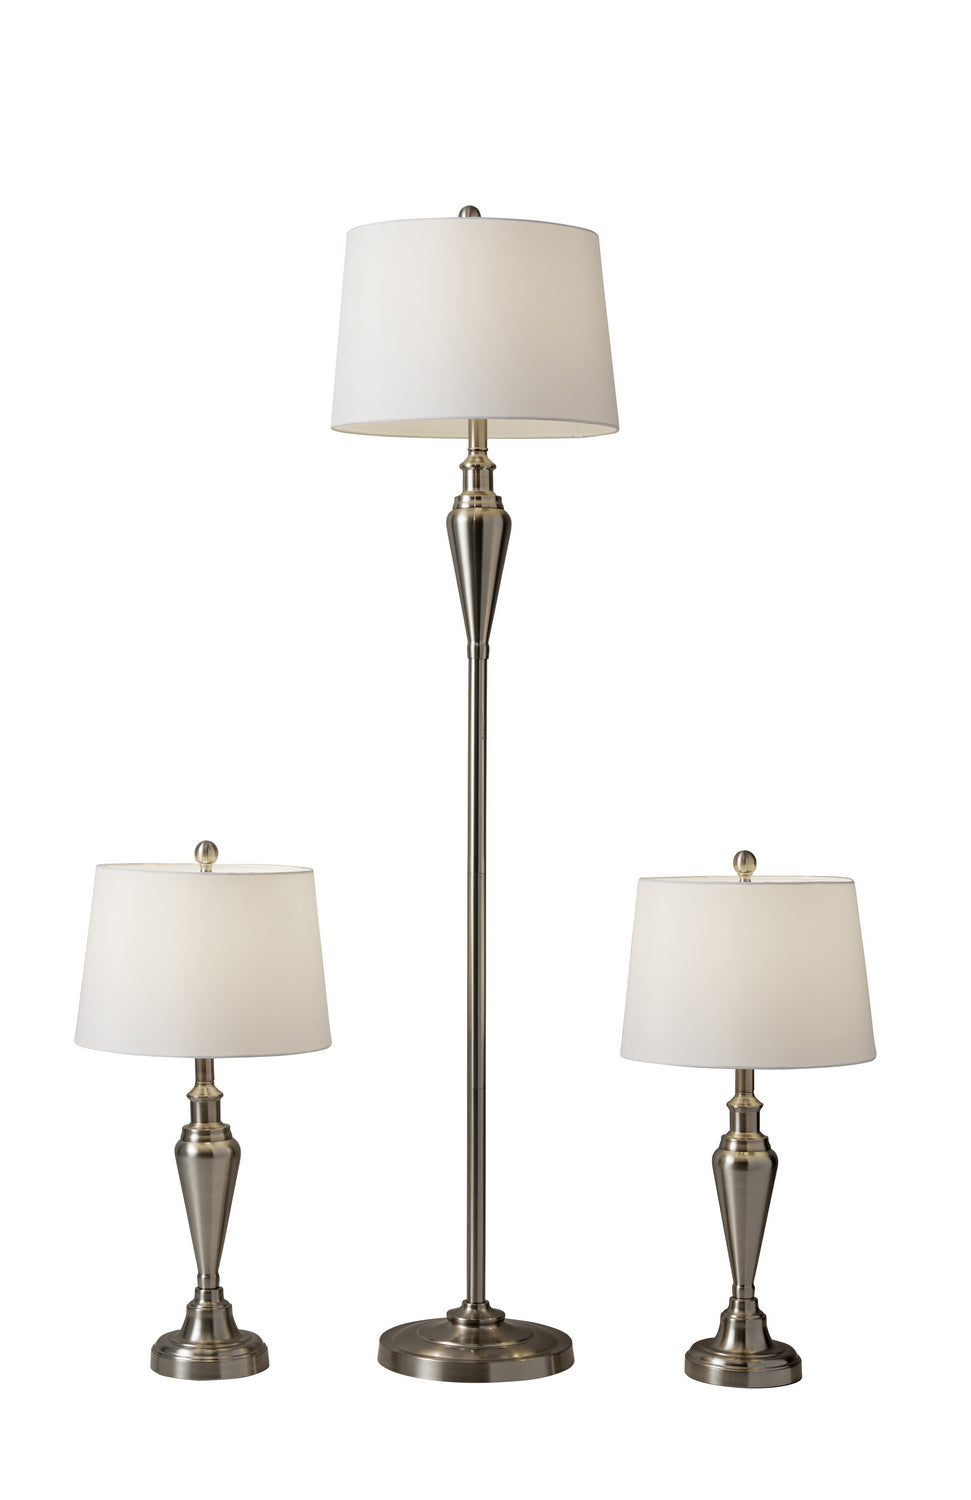 Adesso Home 1583-22  Glendale Lamp Brushed Steel